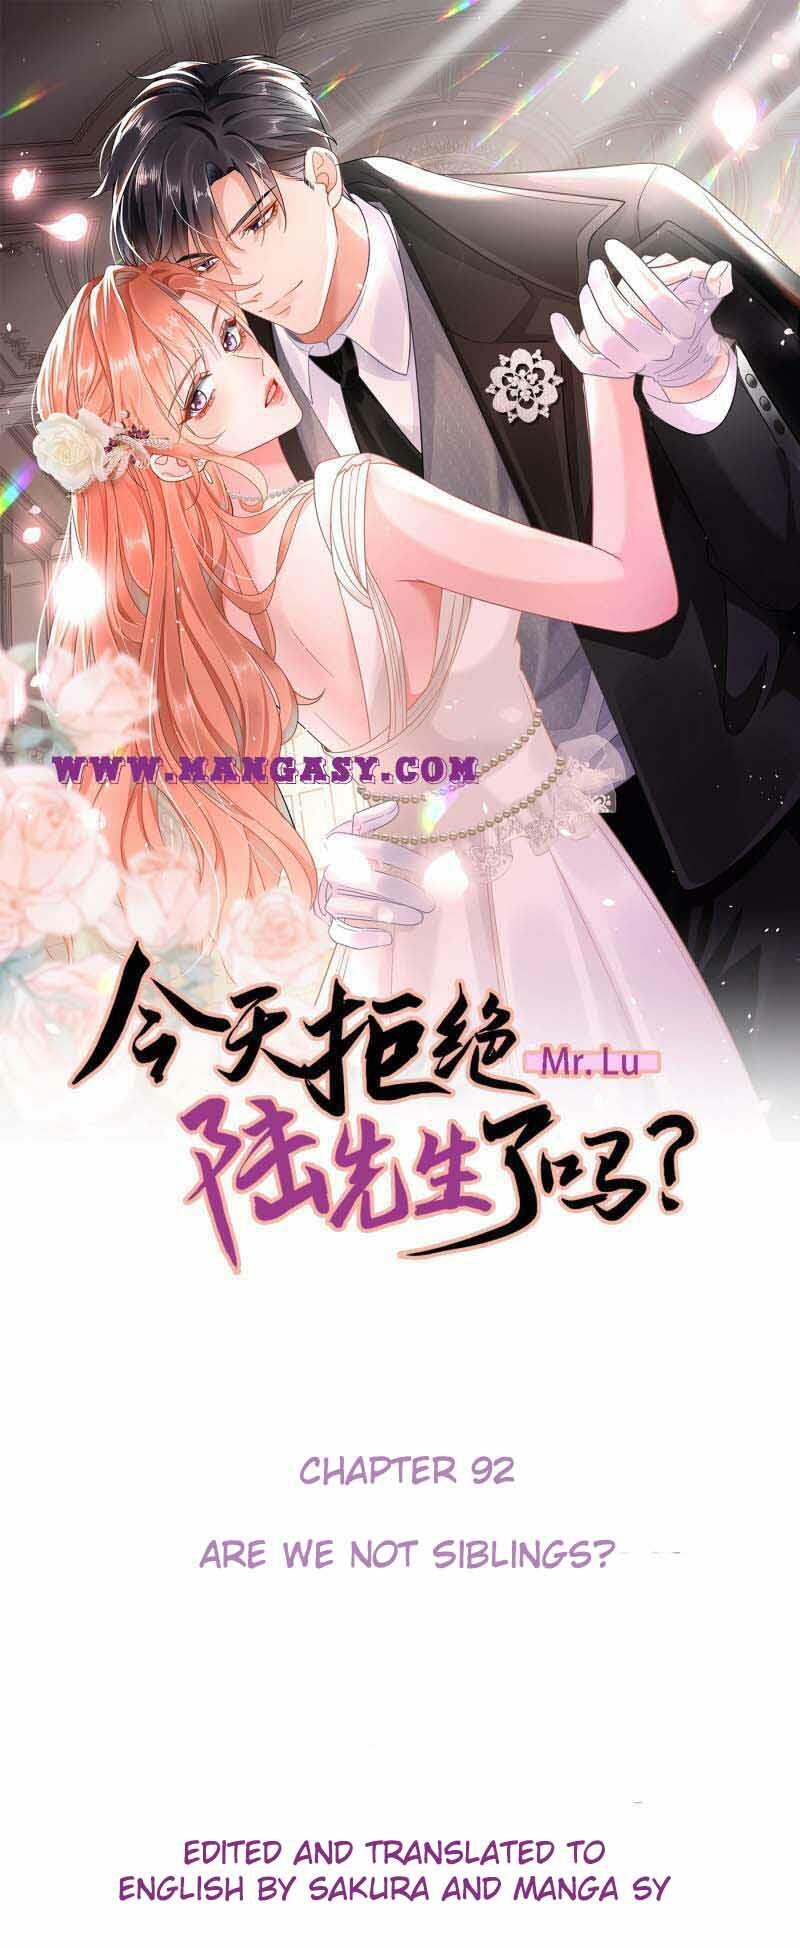 Read Did You Reject Mr.lu Today? Chapter 92 on Mangakakalot